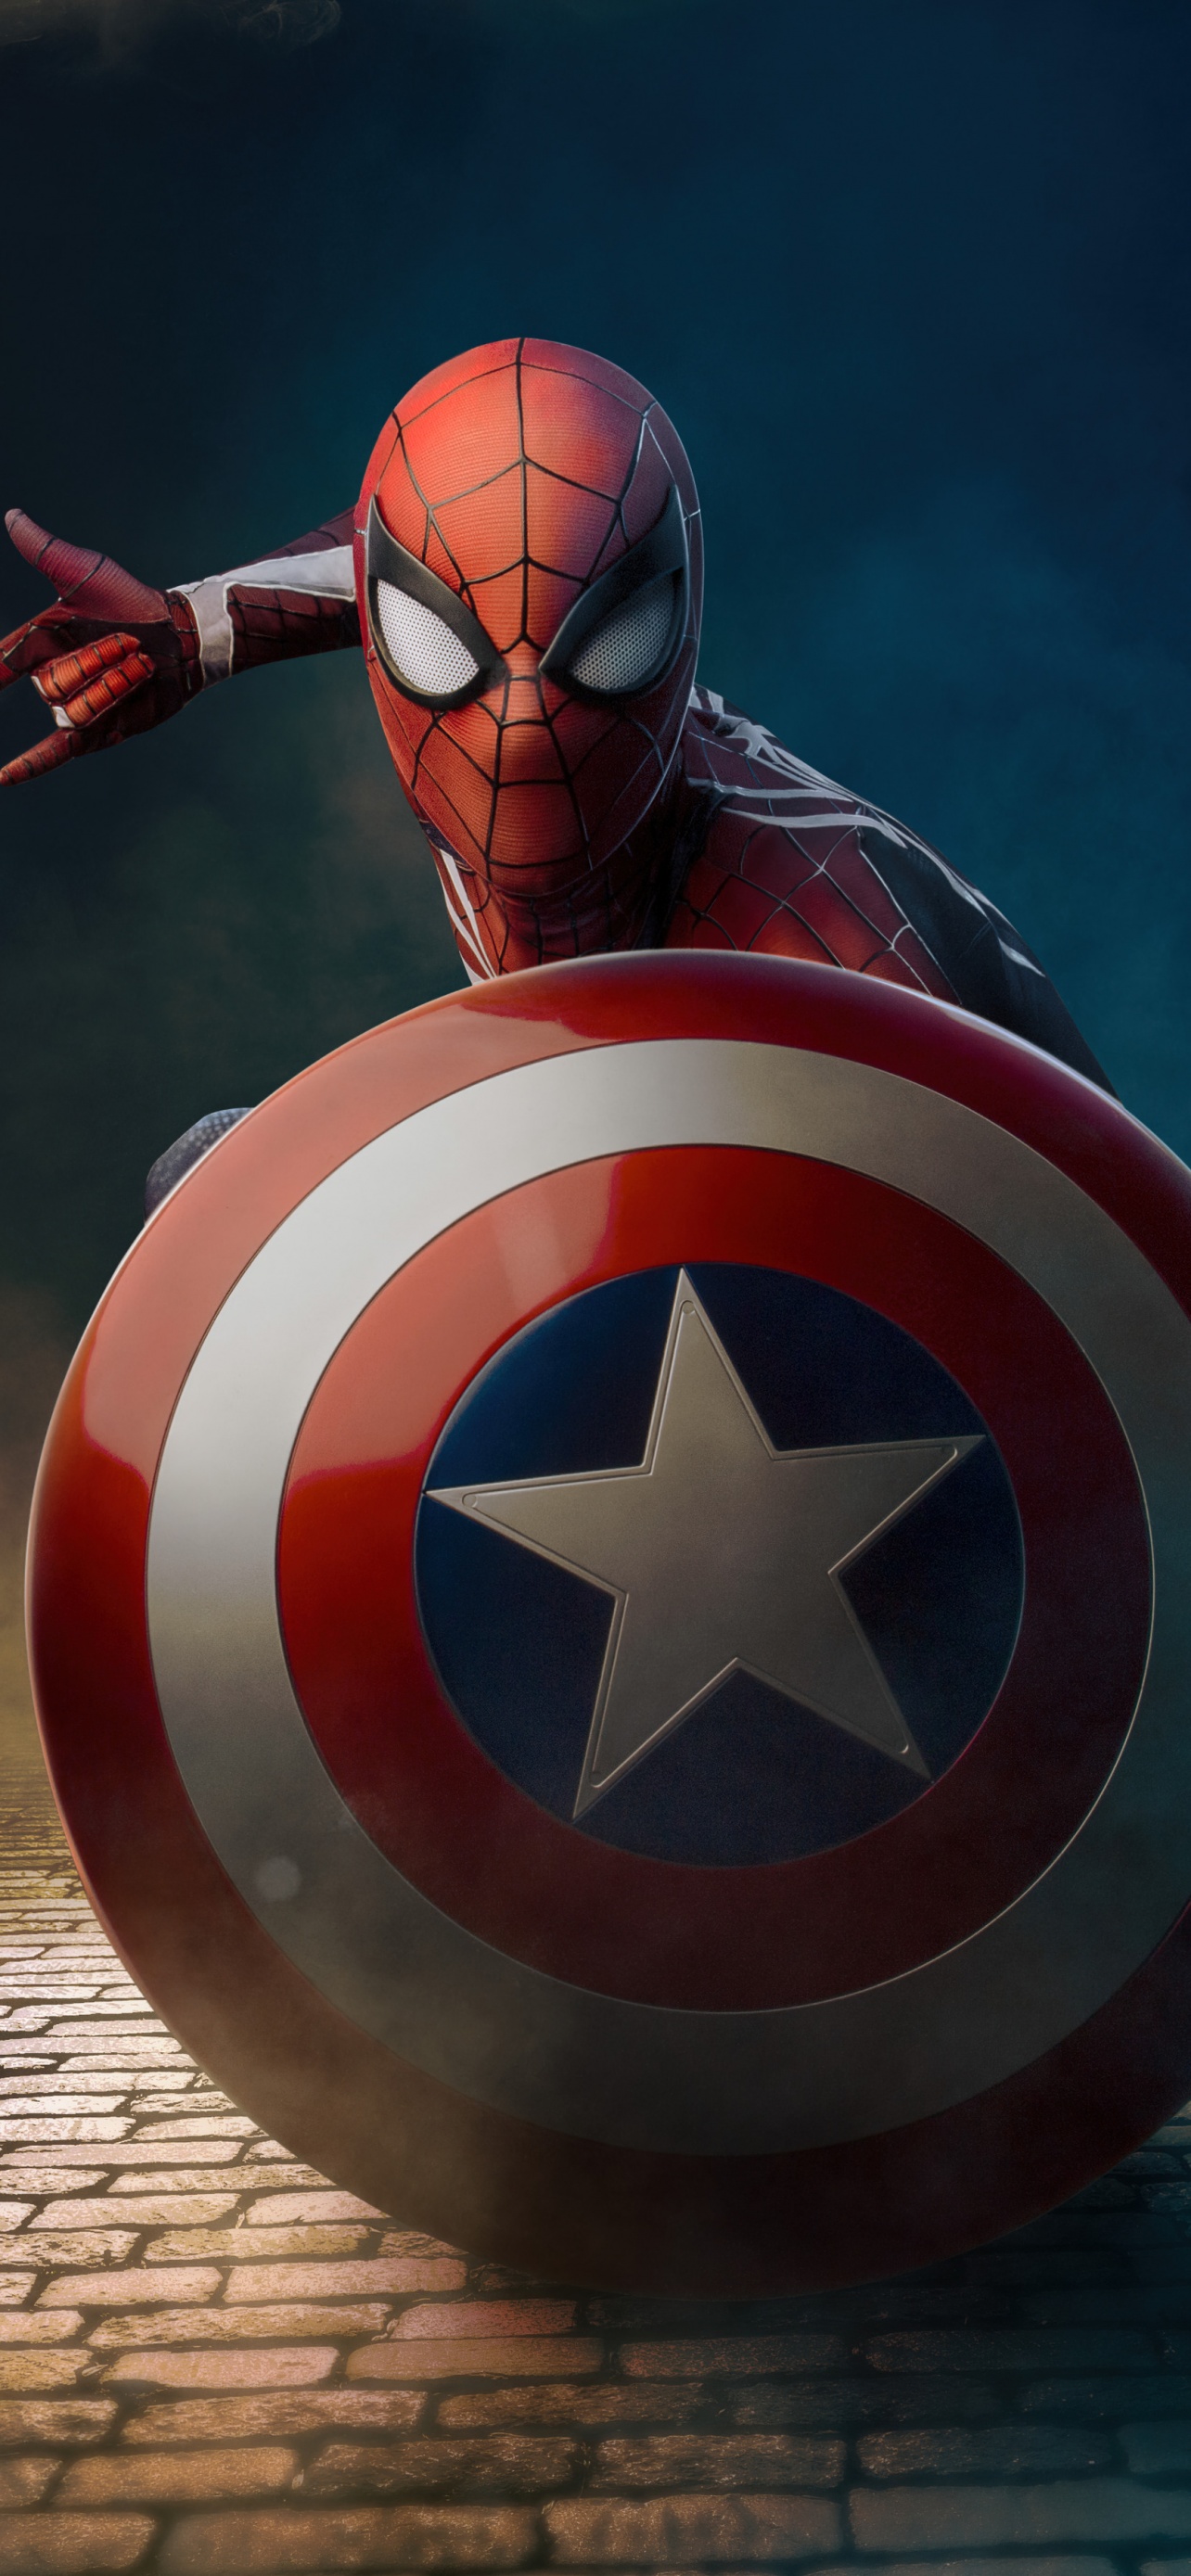 Spider-Man, DC Comic, superhero 828x1792 iPhone 11/XR wallpaper, background,  picture, image